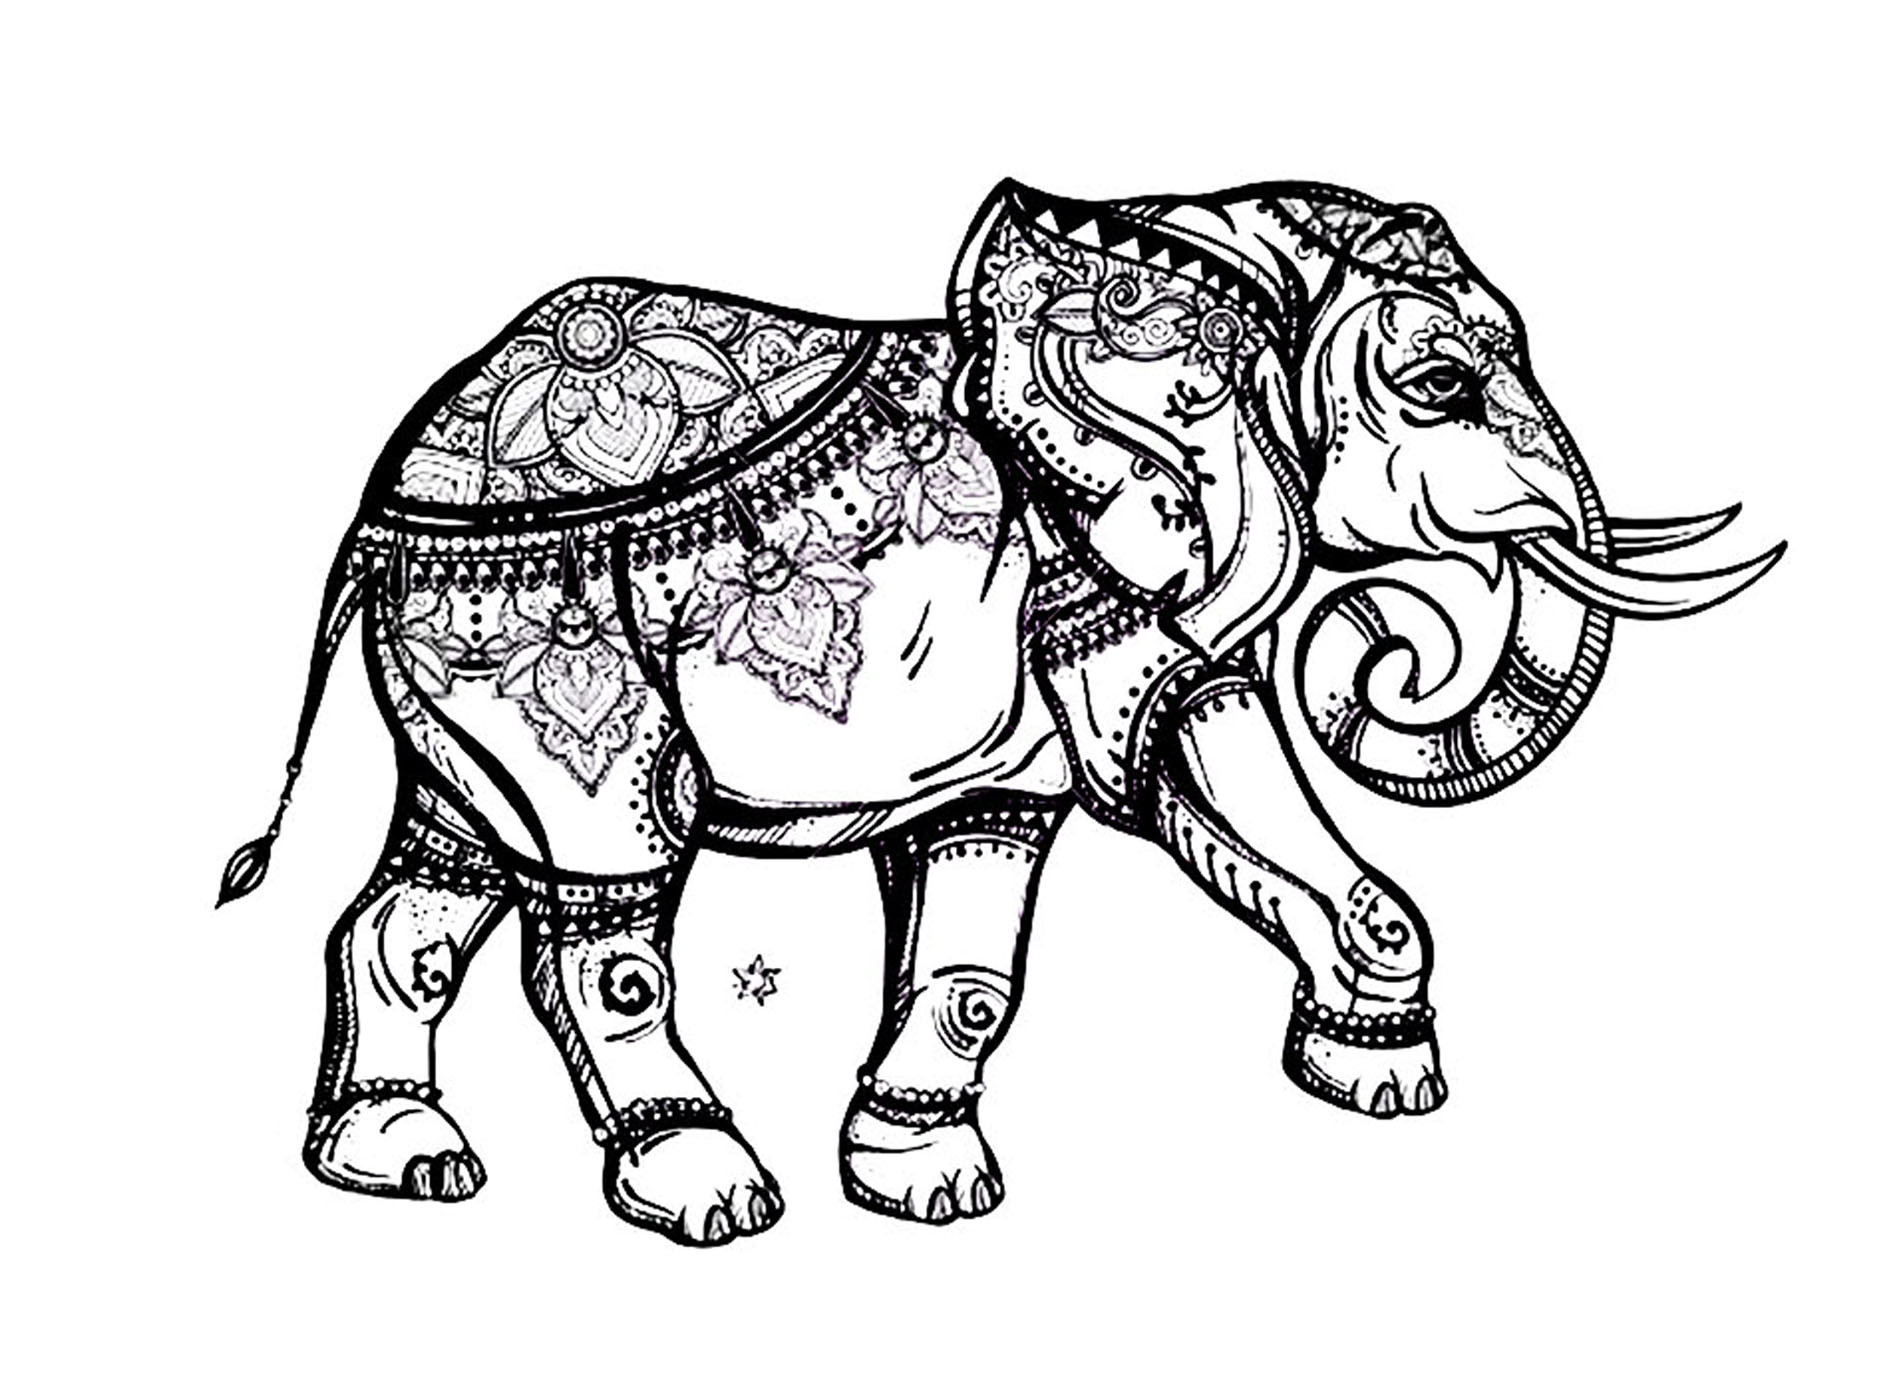 Elephant Coloring Book For Adults
 Elegant elephant Elephants Adult Coloring Pages